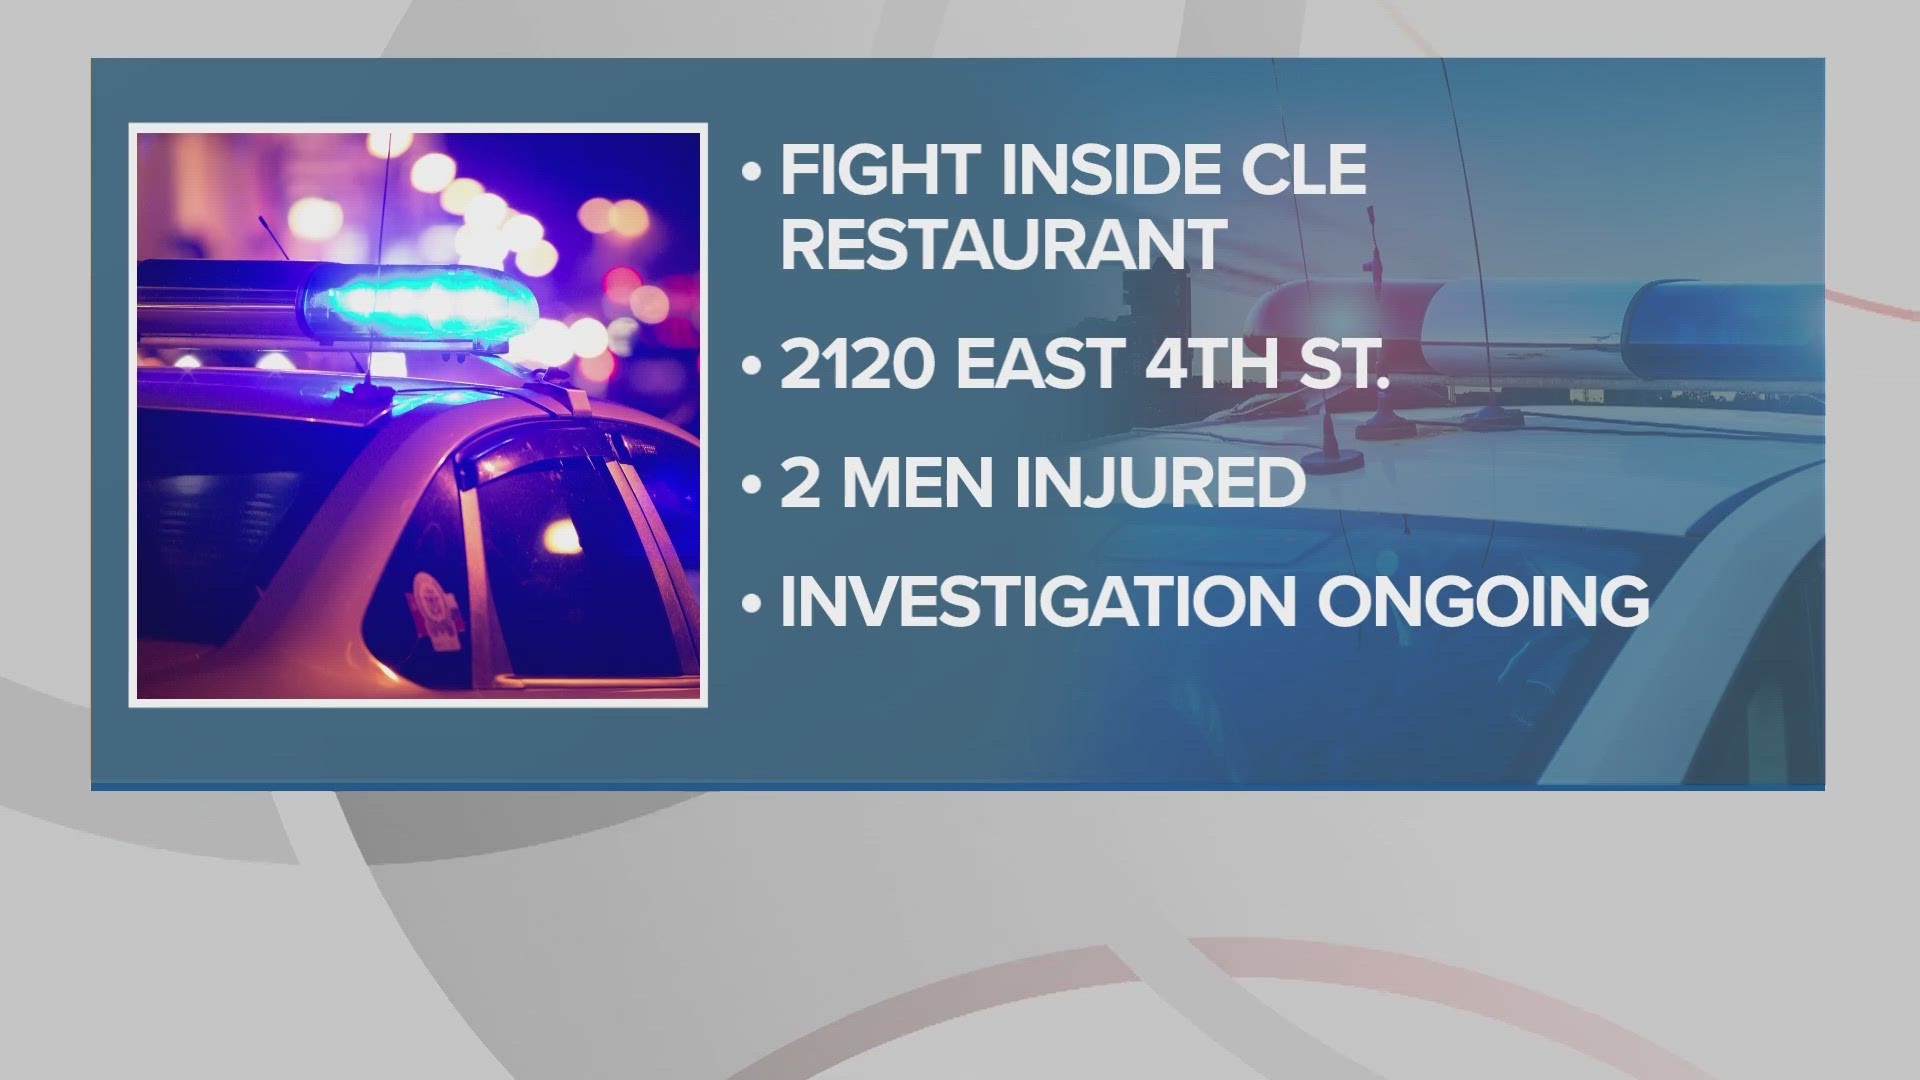 The fight broke out inside the Harry Buffalo at 2120 East 4th St. at around 1:20 a.m.